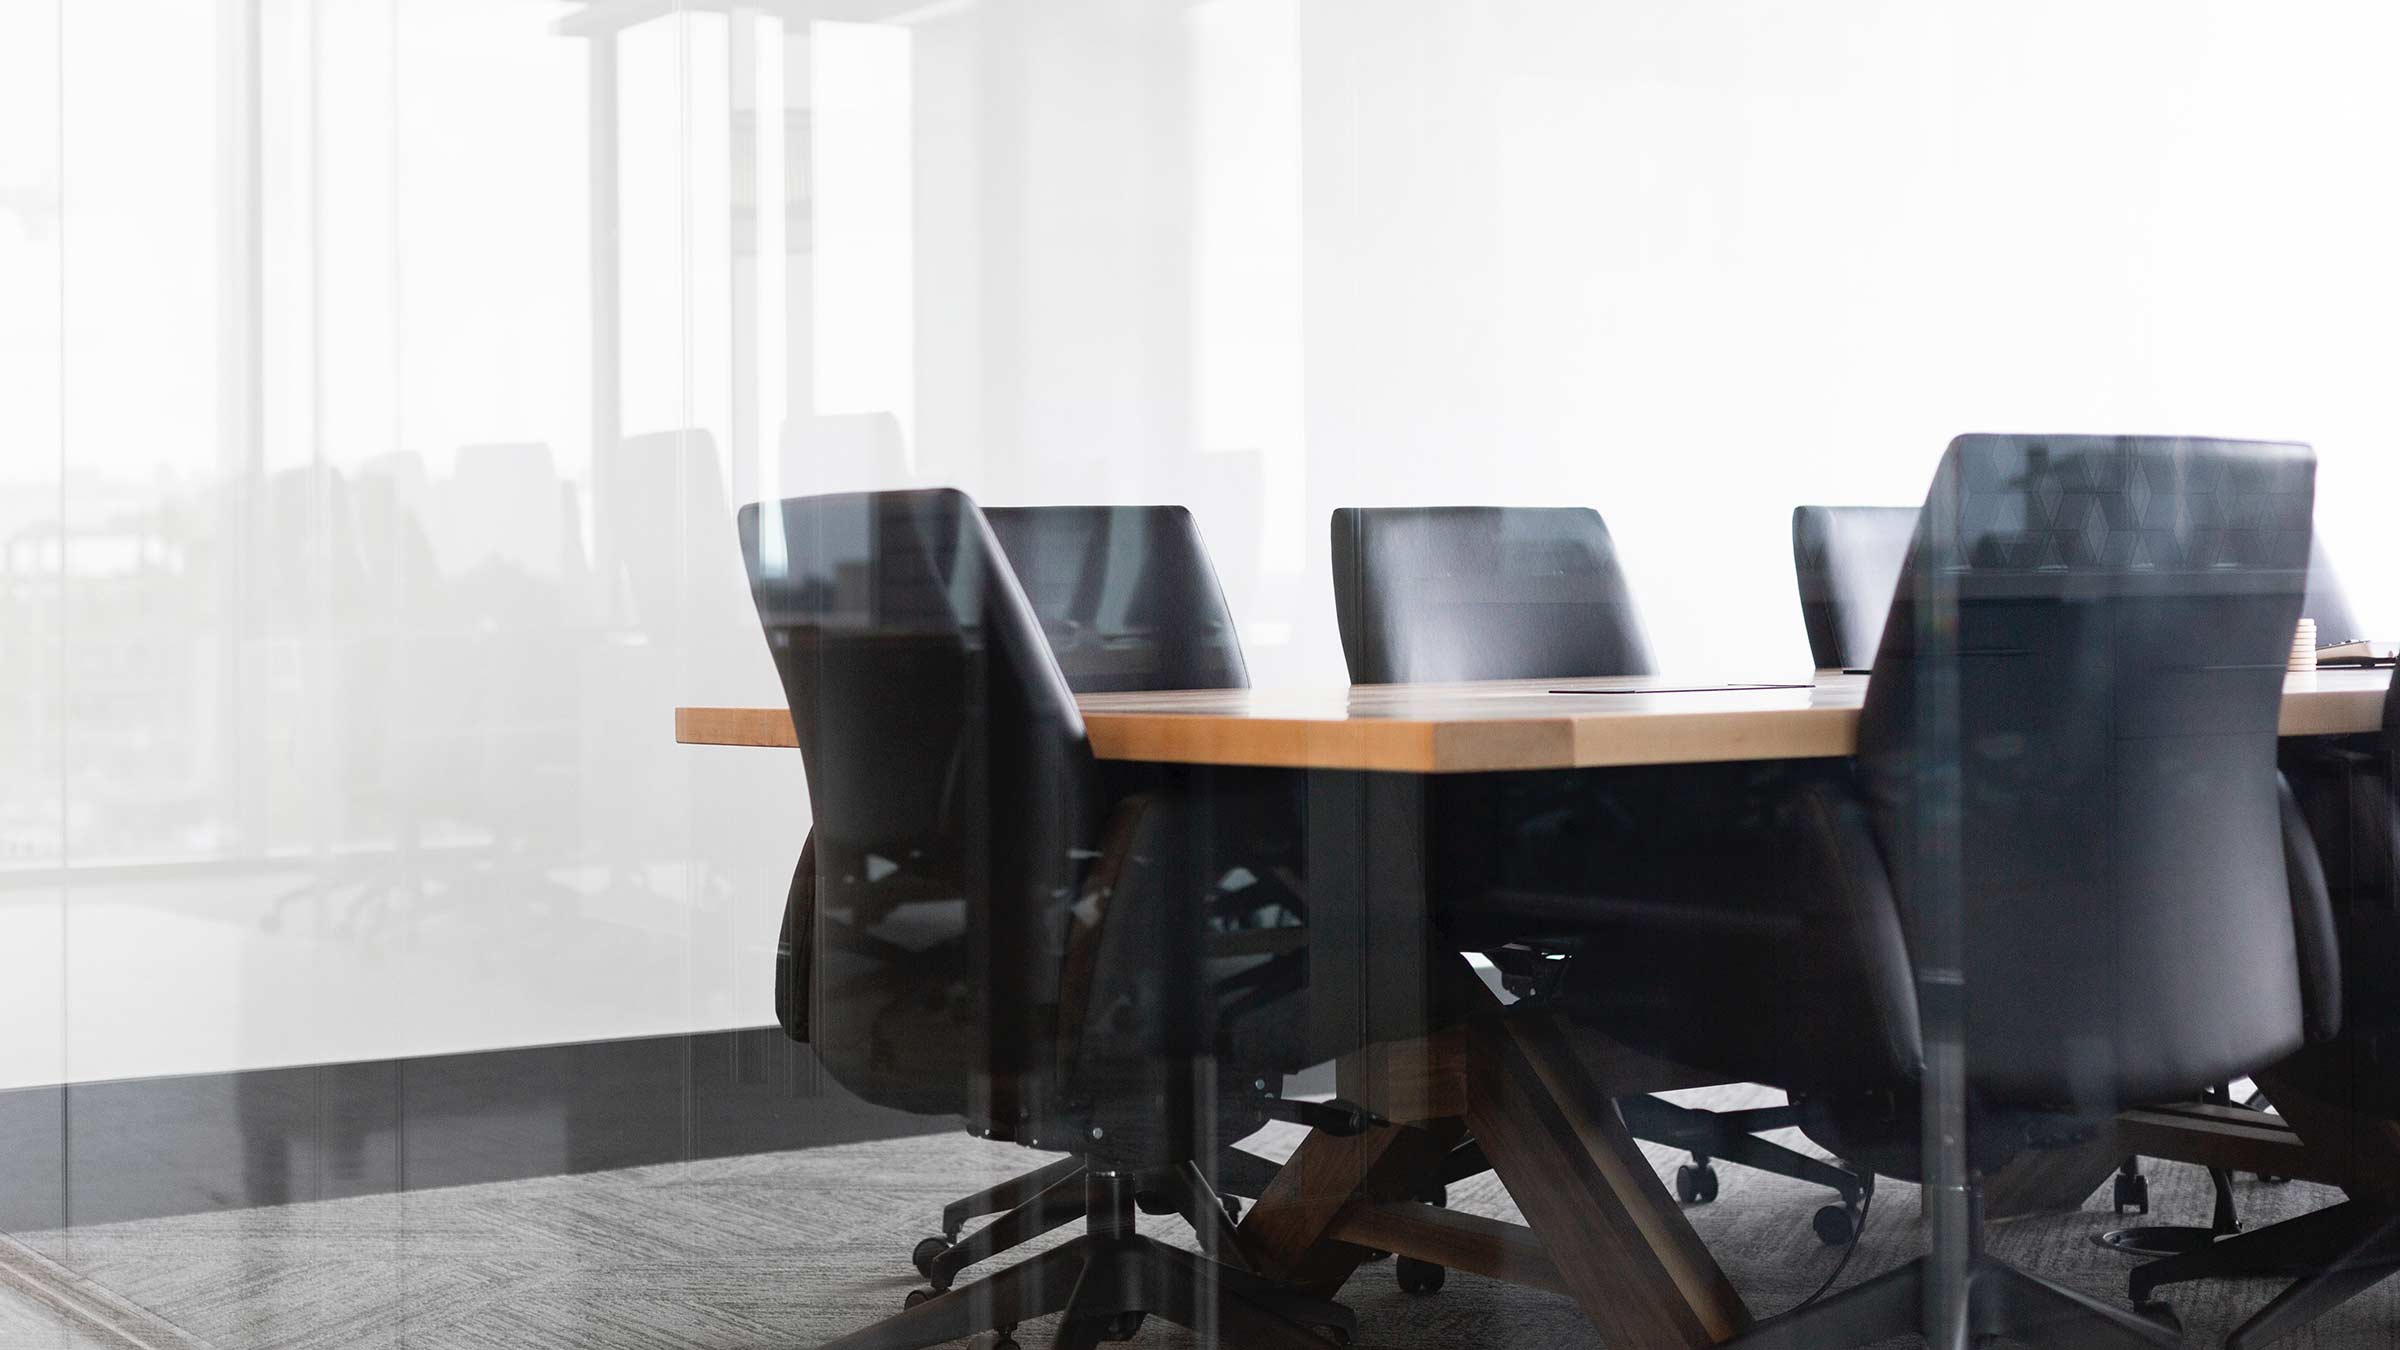 Practice social distancing, but keep your HRDs close: a new voice around the boardroom table